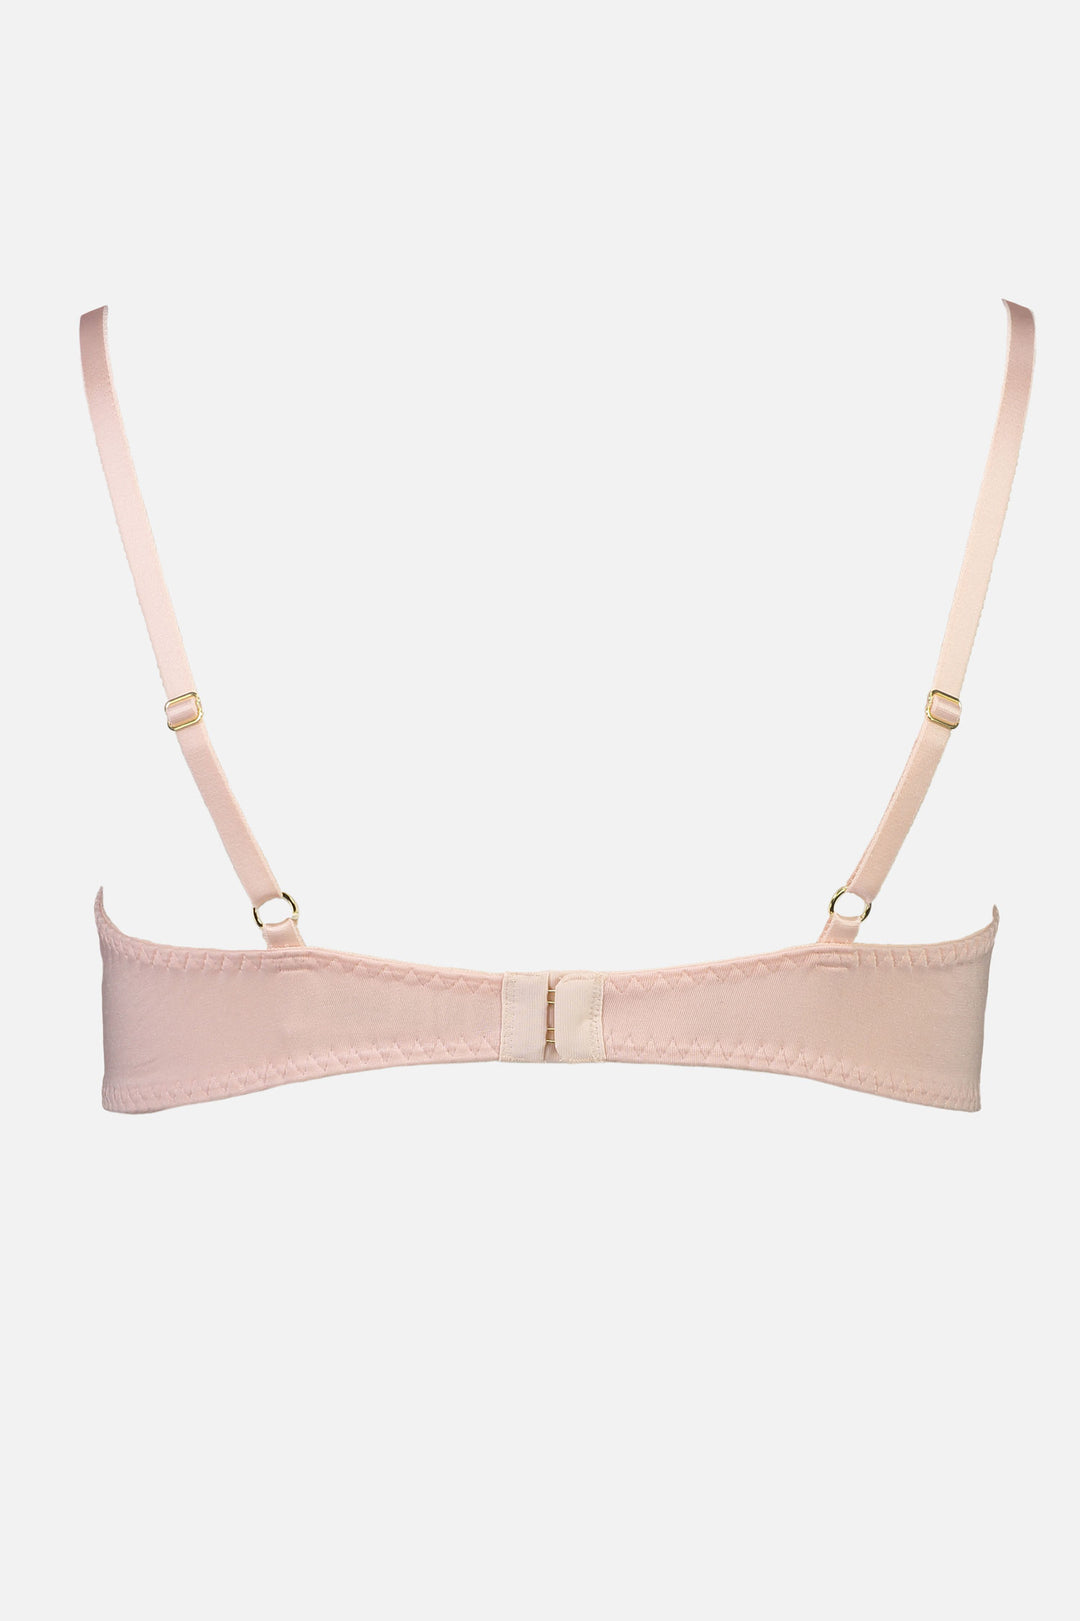 Videris Lingerie Angela underwire free soft cup bra in pale pink TENCEL™ features adjustable back straps and back closure